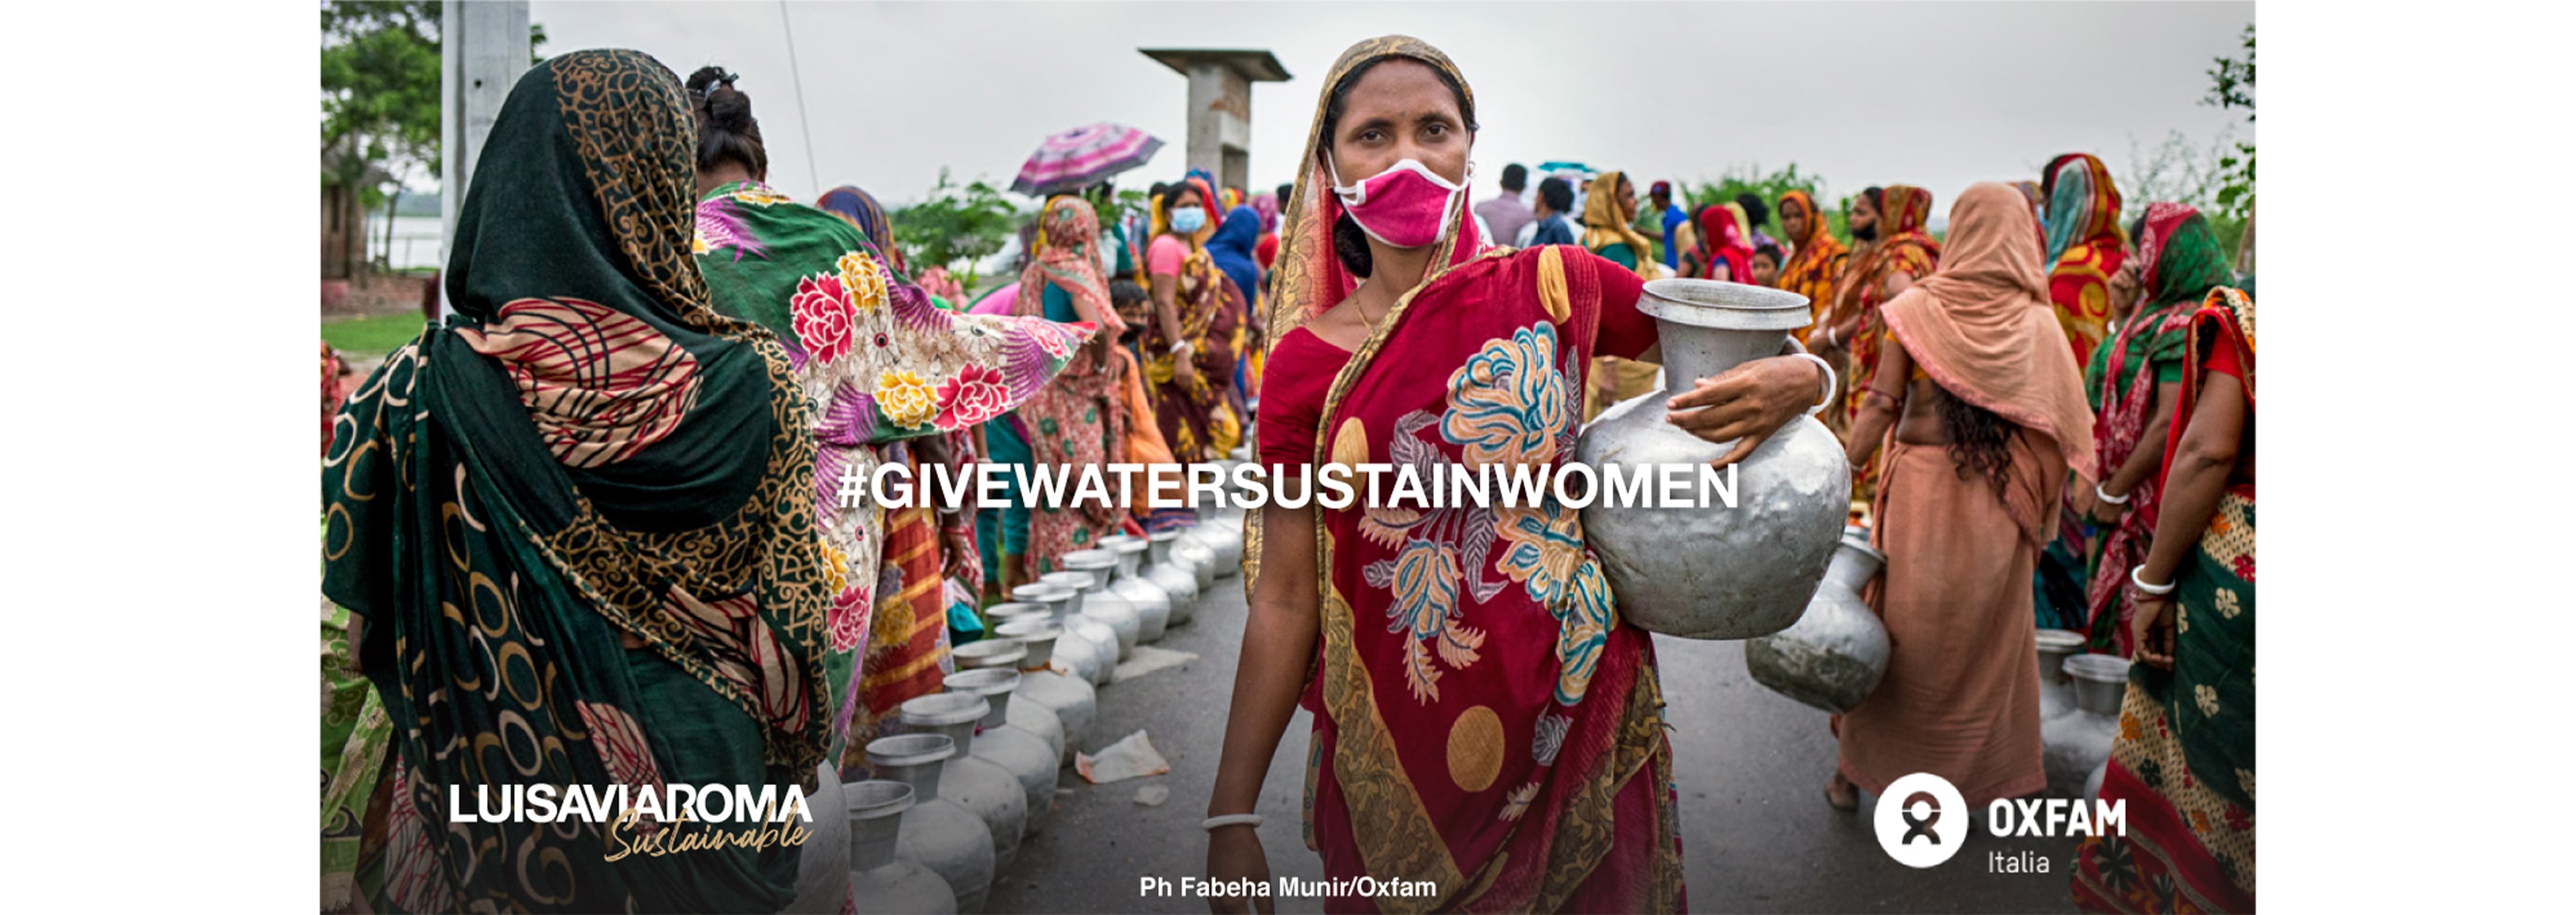 LVRSustainable & Oxfam Italy “Give Water, Sustain Women”：Dorothy的故事